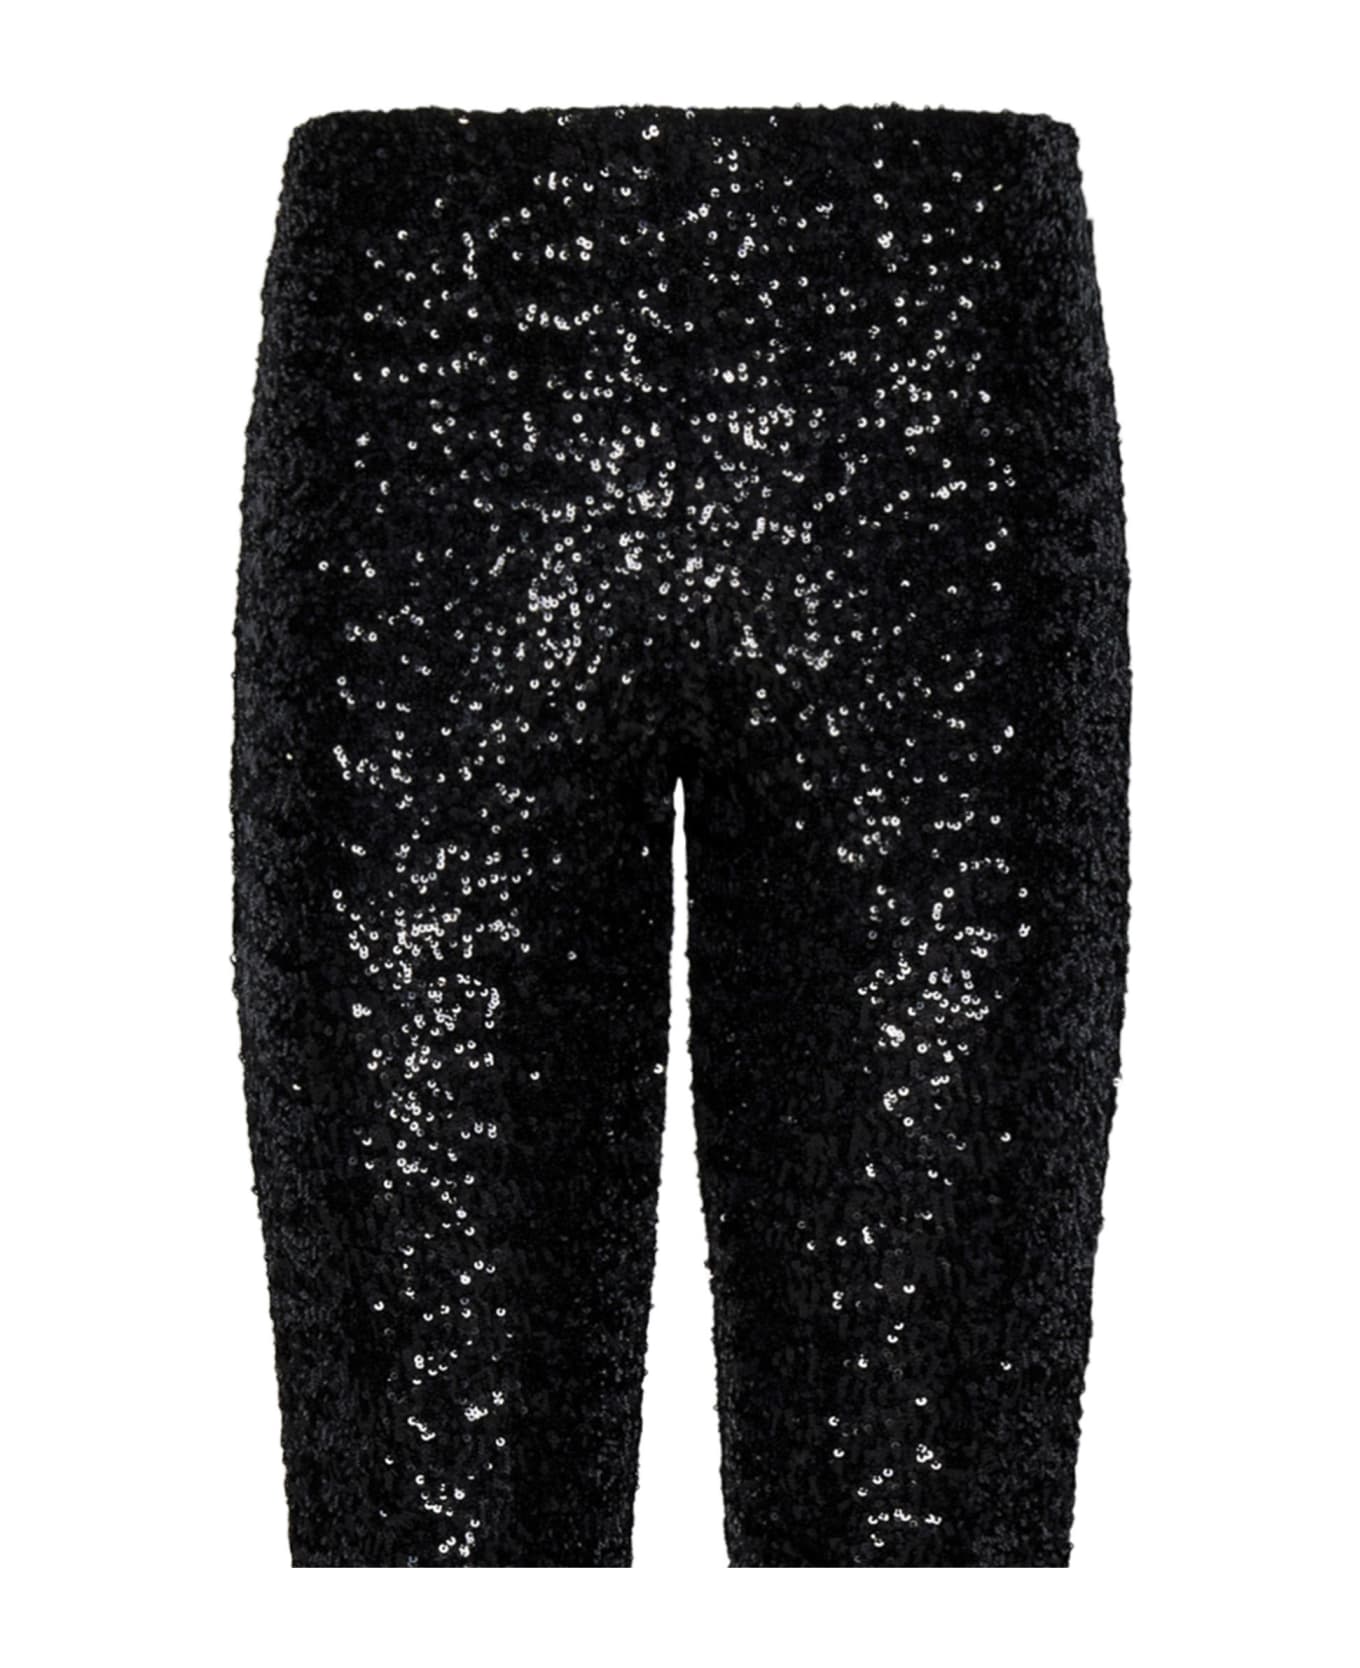 Oseree Trousers - Black